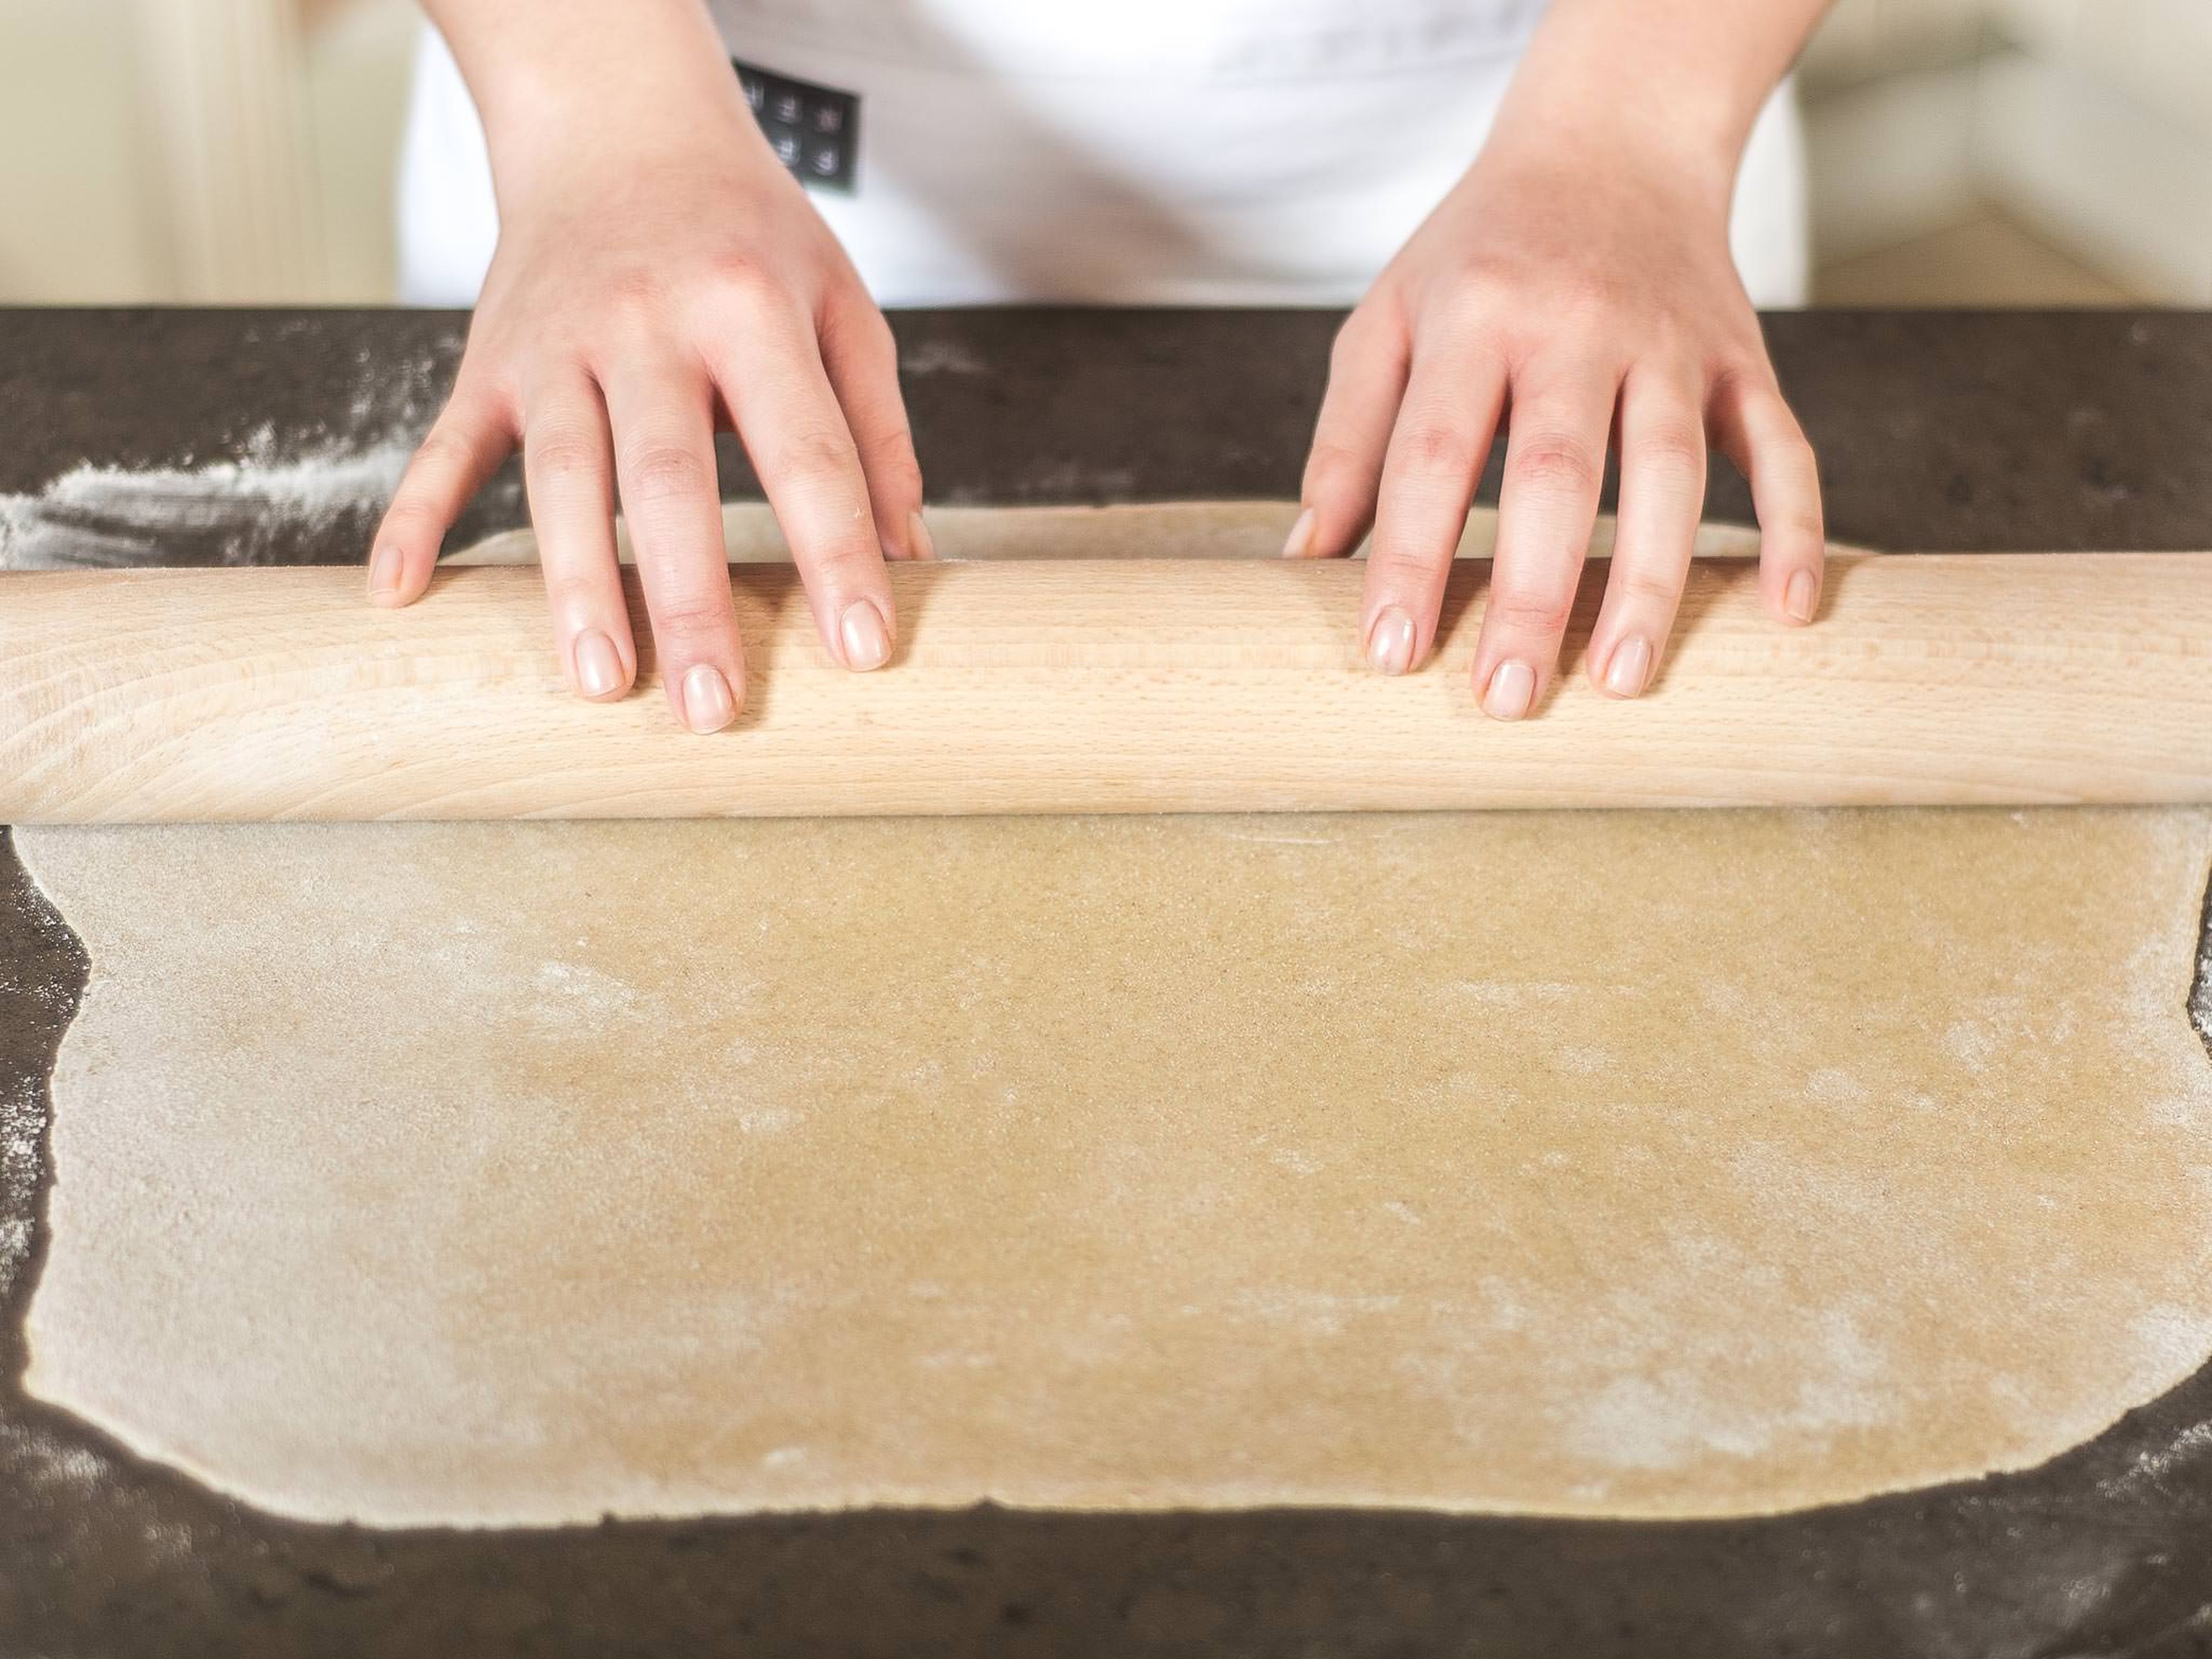 Divide the dough into two equal pieces and roll out each until flat on a work surface sprinkled with flour. Transfer to a lined baking tray.